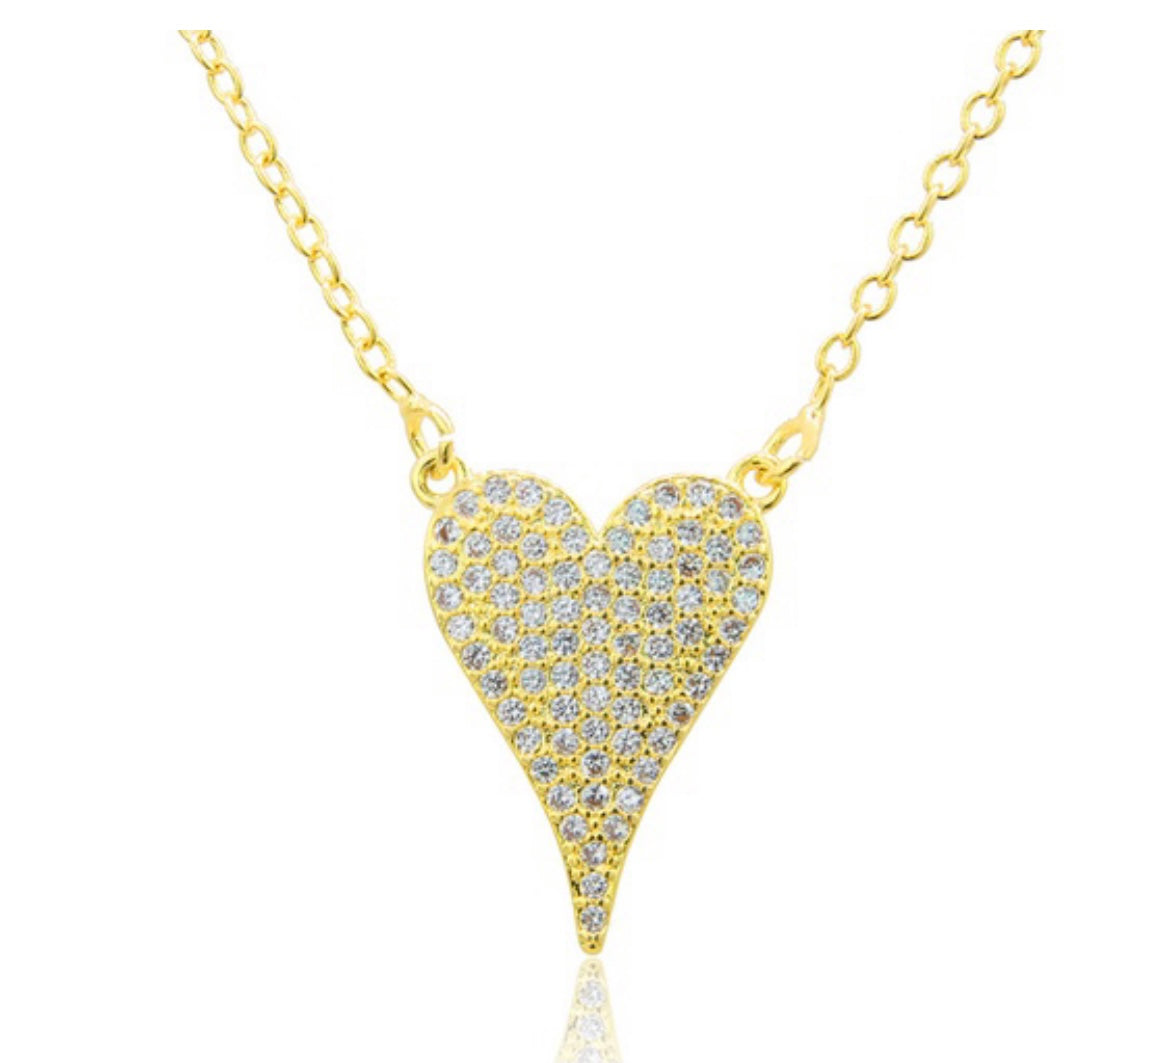 Stella Necklace - Gold - Water Resistant